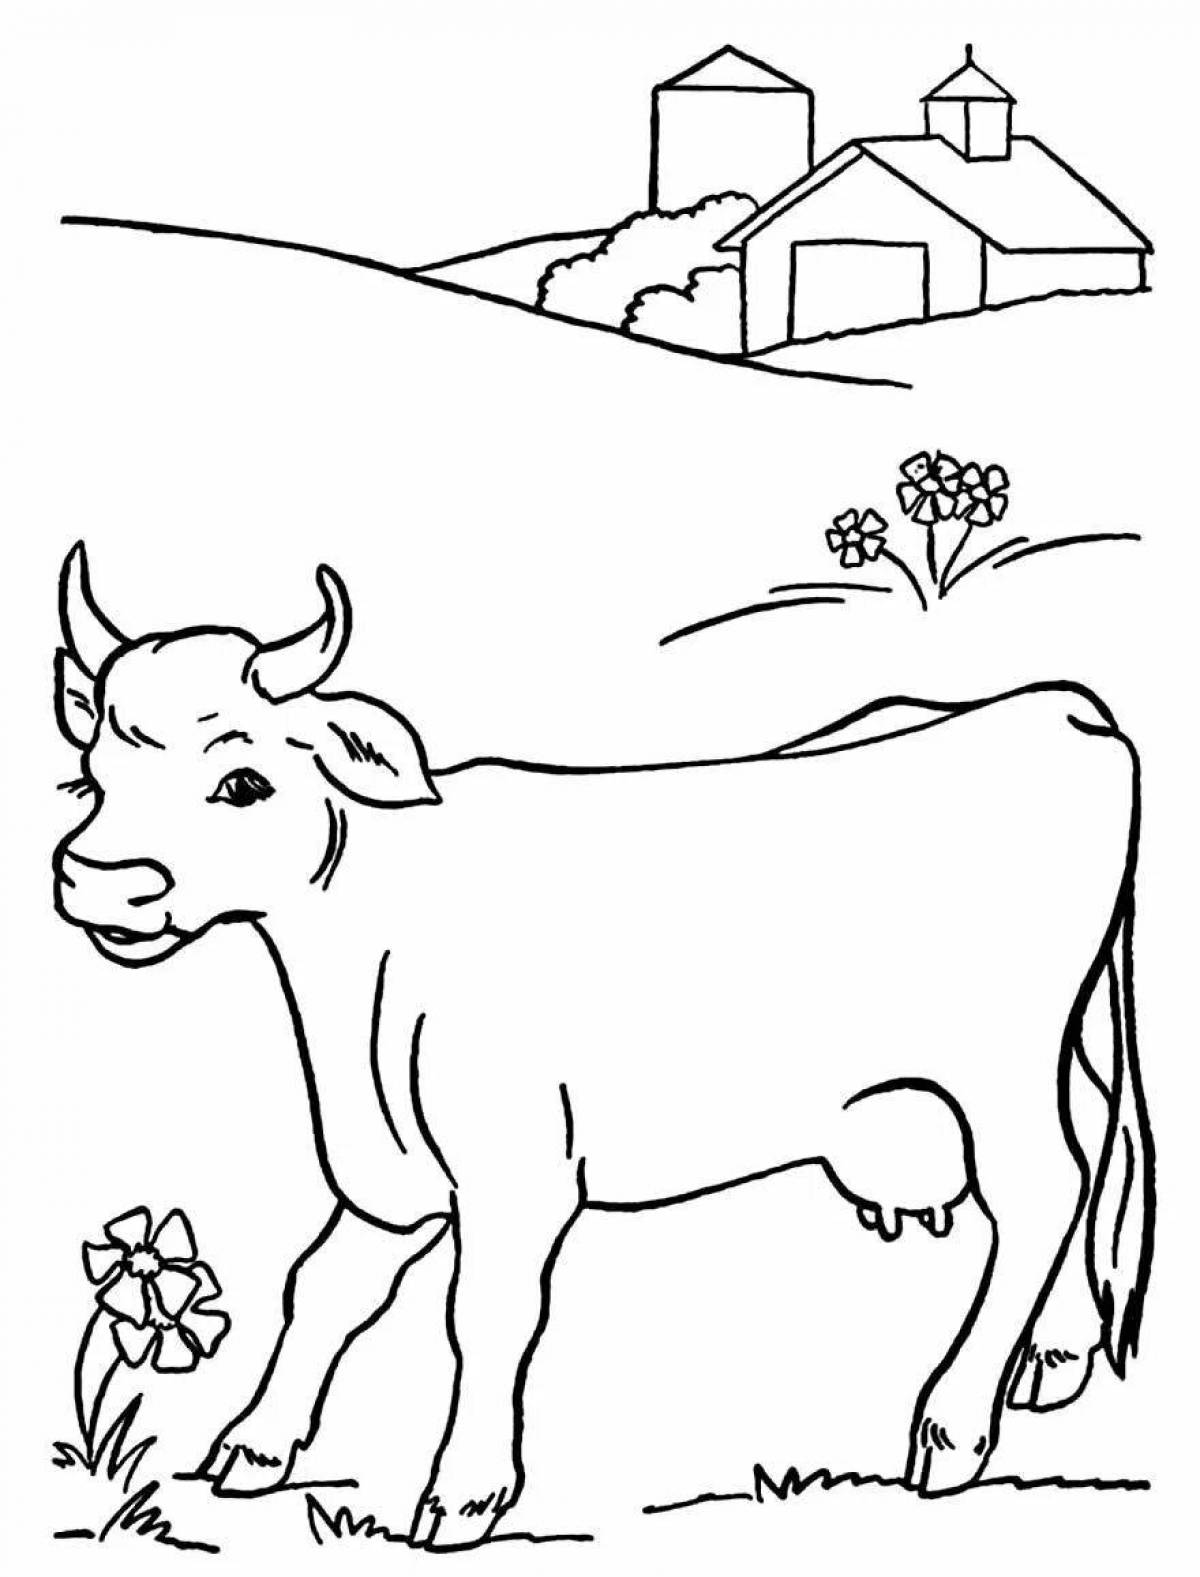 Amazing cow coloring book for 5-6 year olds